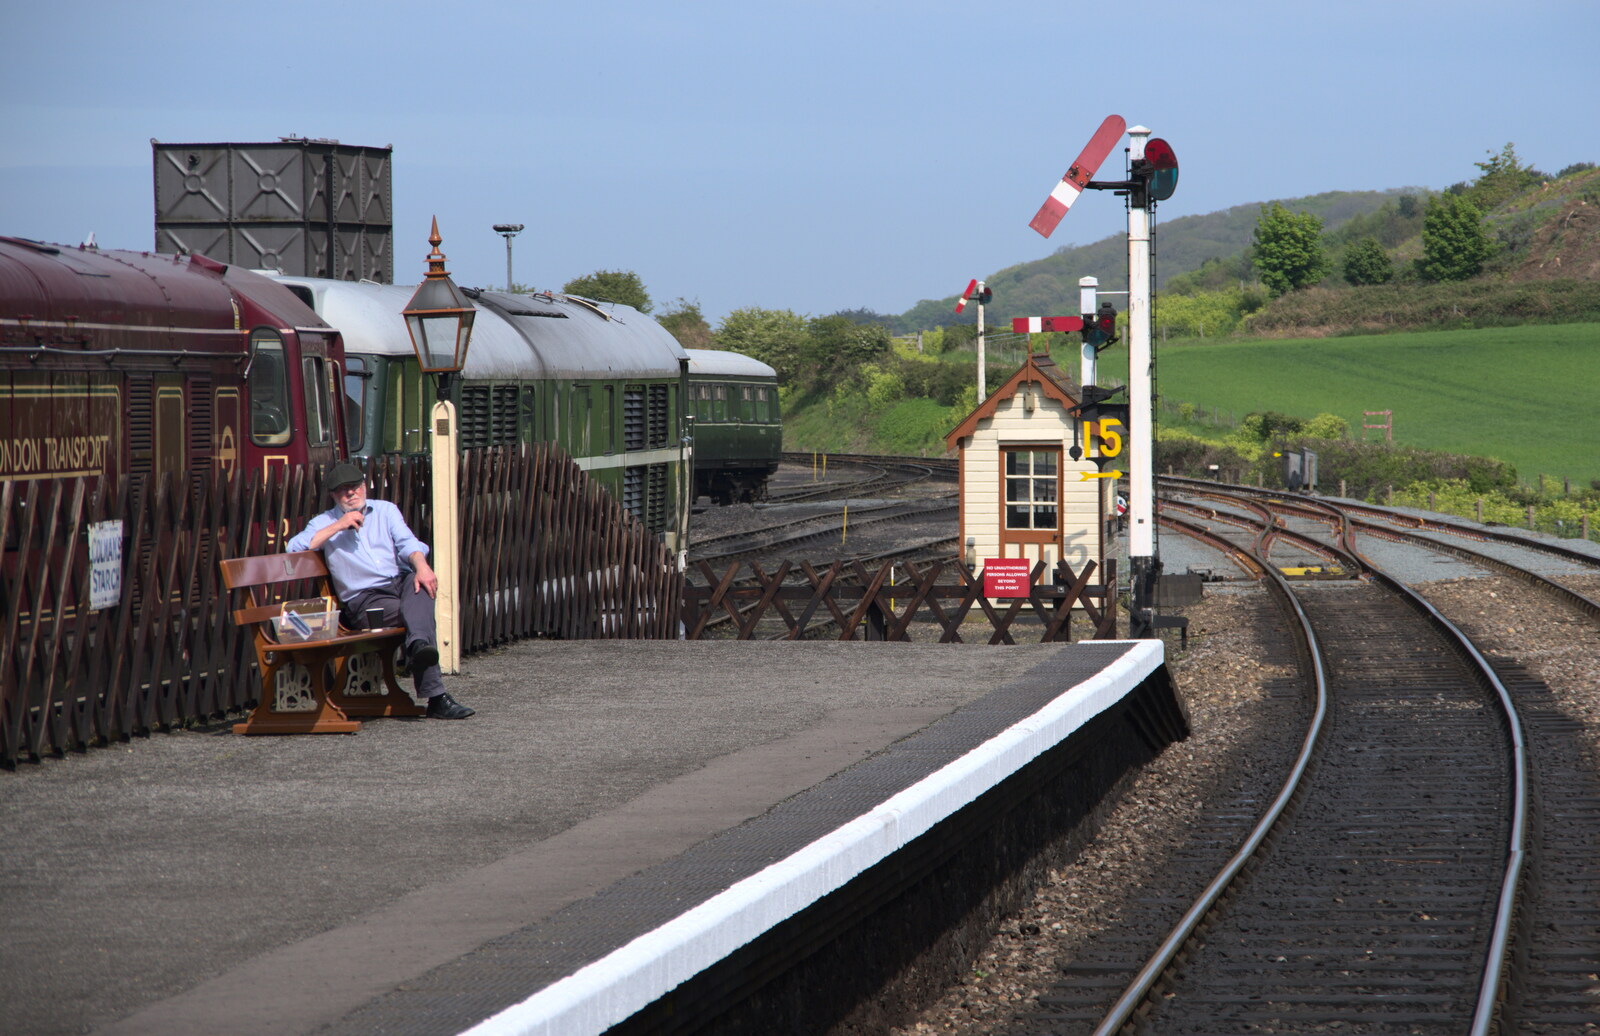 Some dude waits on the platform at Weybourne from A Coronation Camping Picnic, Kelling Heath, Norfolk - 6th May 2023